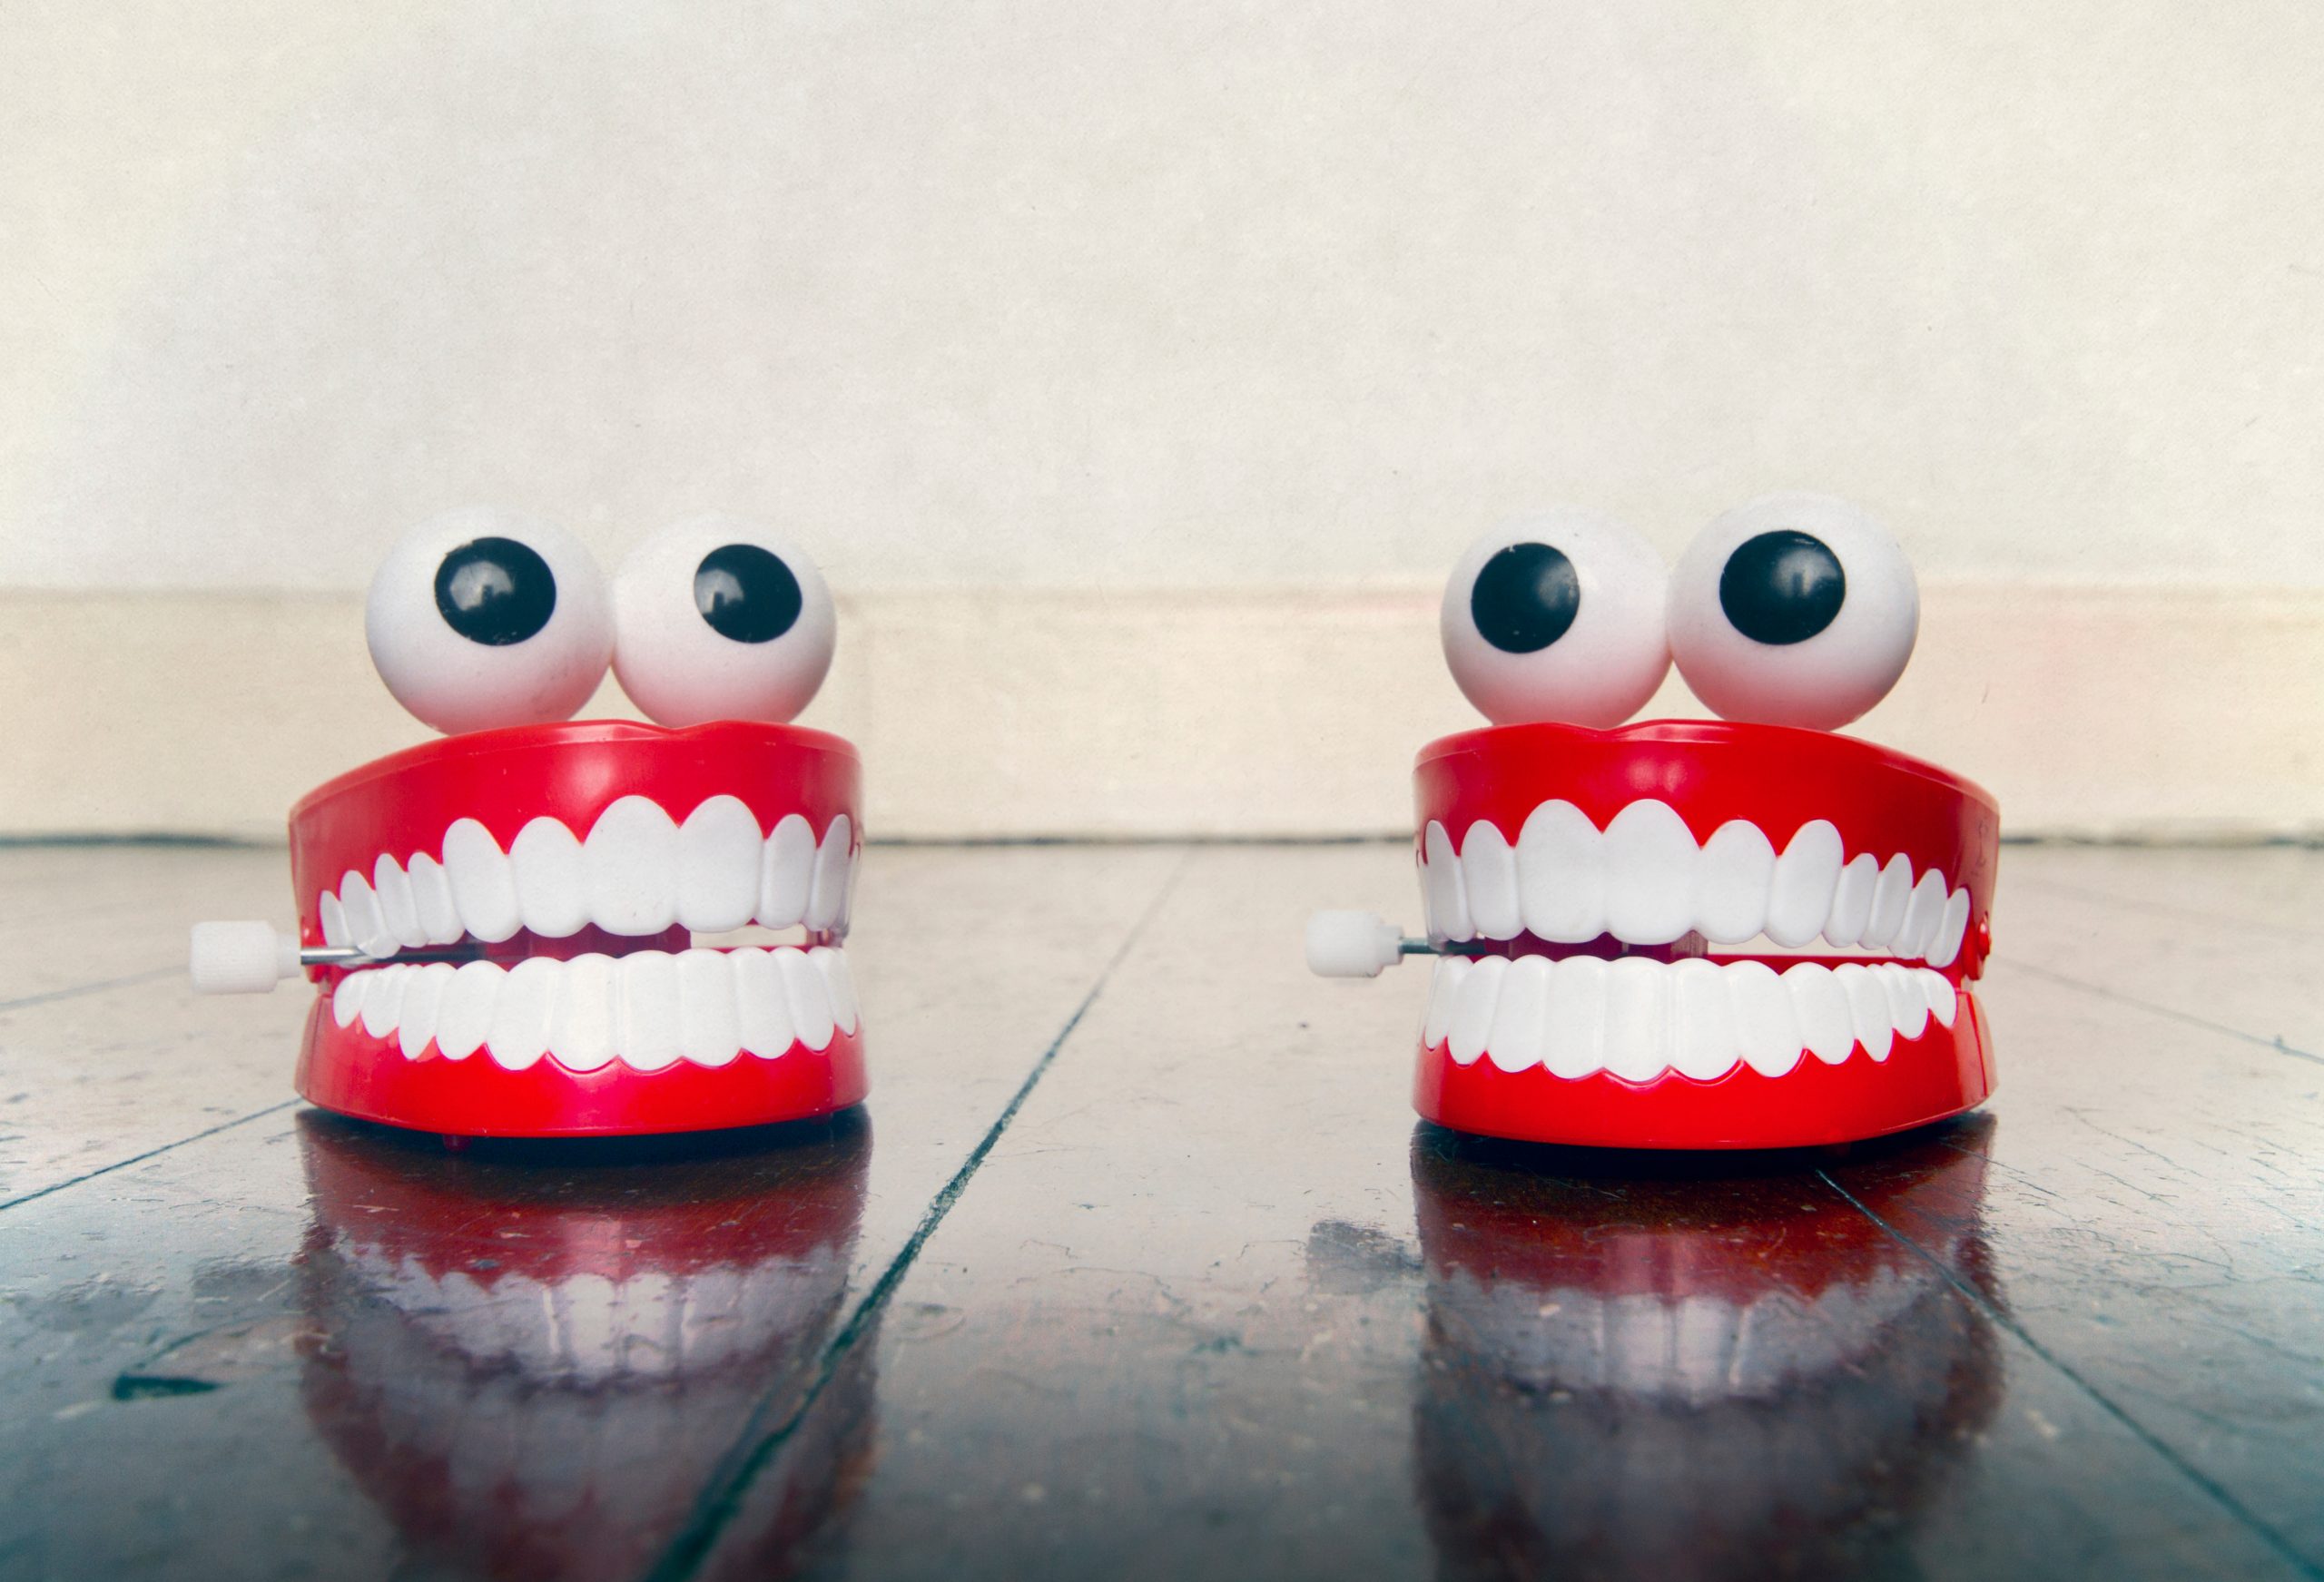 Two,Platic,Teeth,Toys,Chatting,On,A,Old,Wooden,Floor